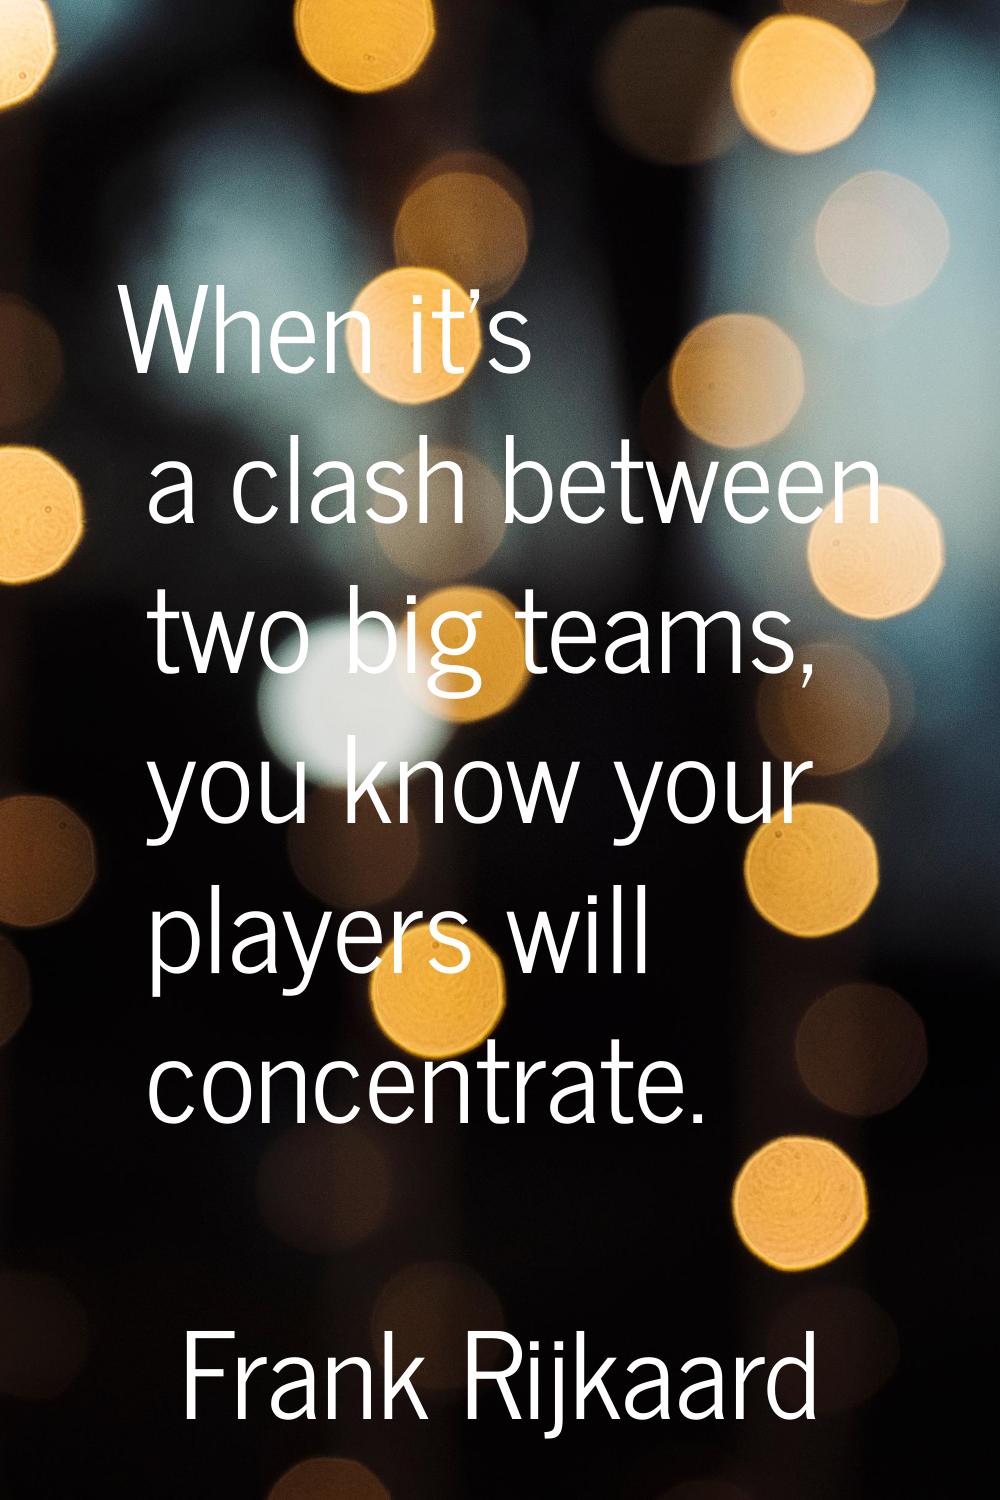 When it's a clash between two big teams, you know your players will concentrate.